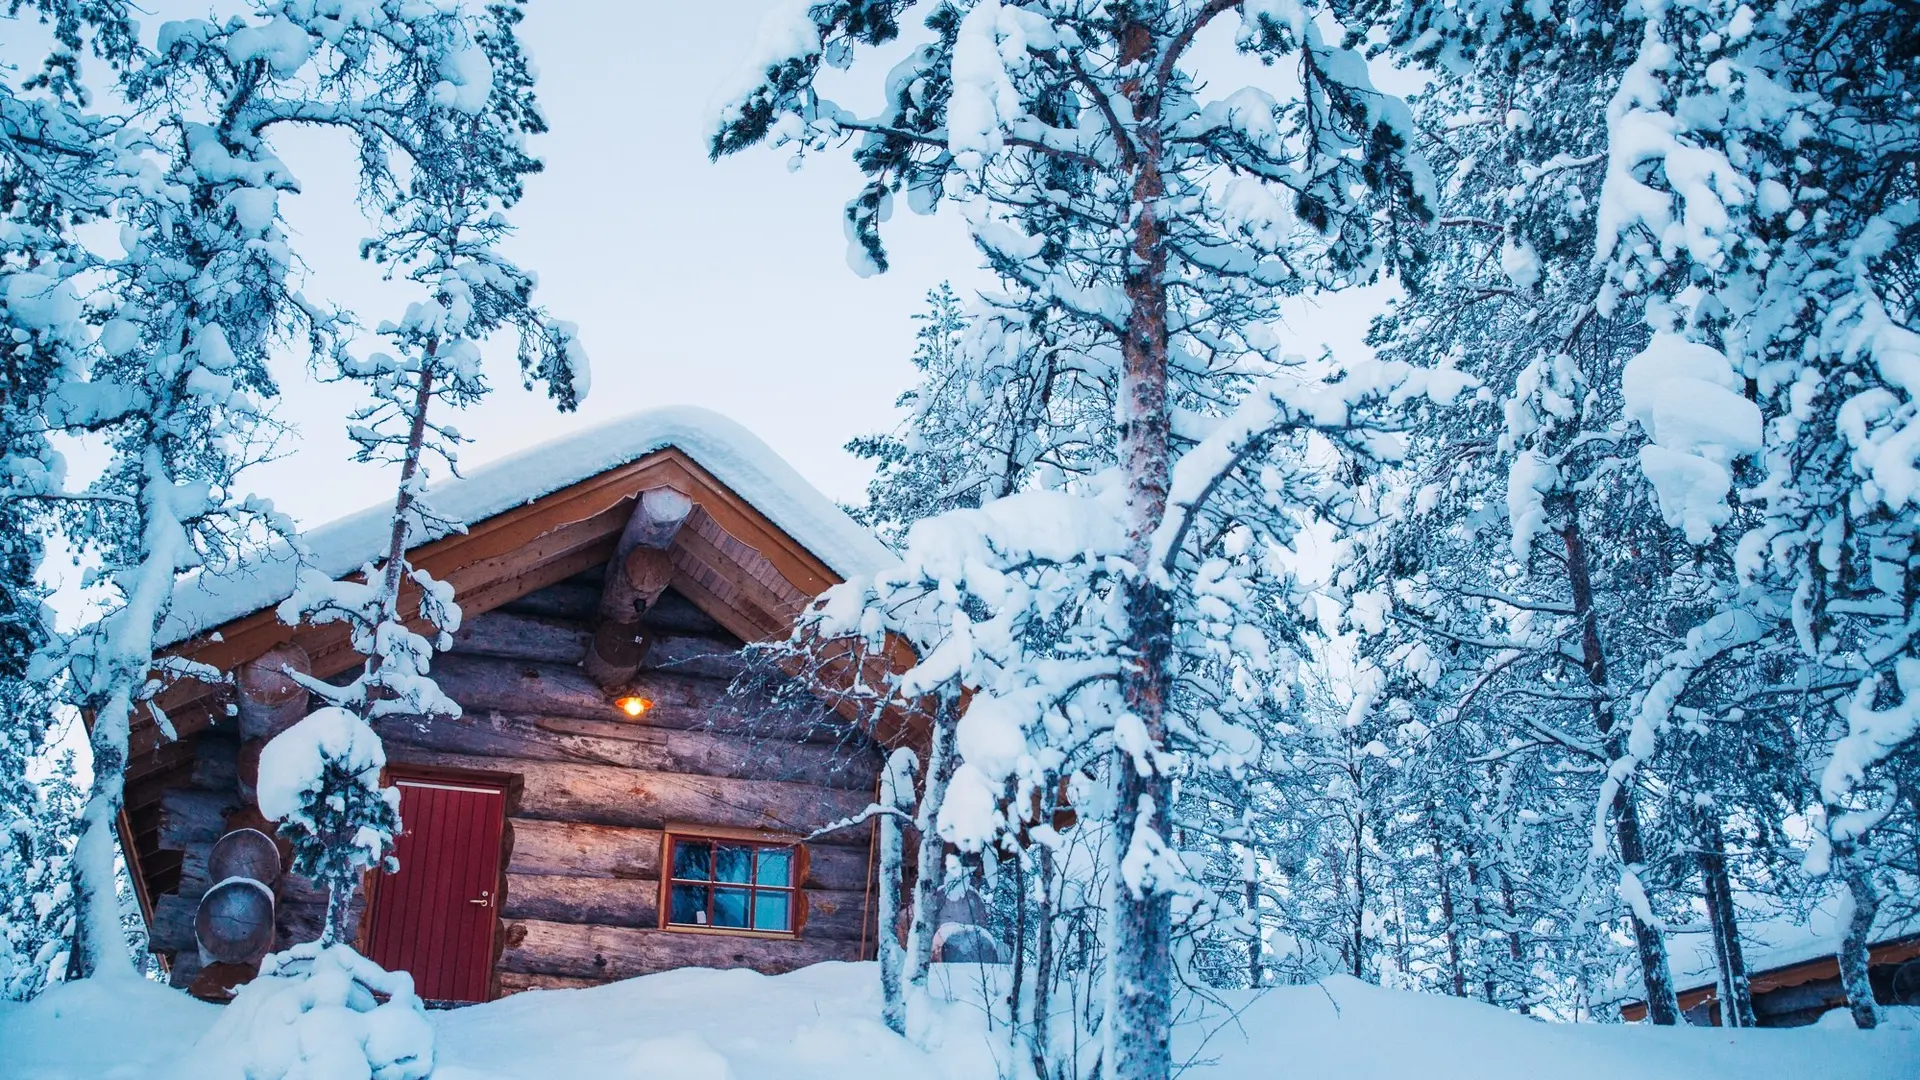 Hotel review Accommodation' - Kakslauttanen Arctic Resort - Igloos and Chalets - 4